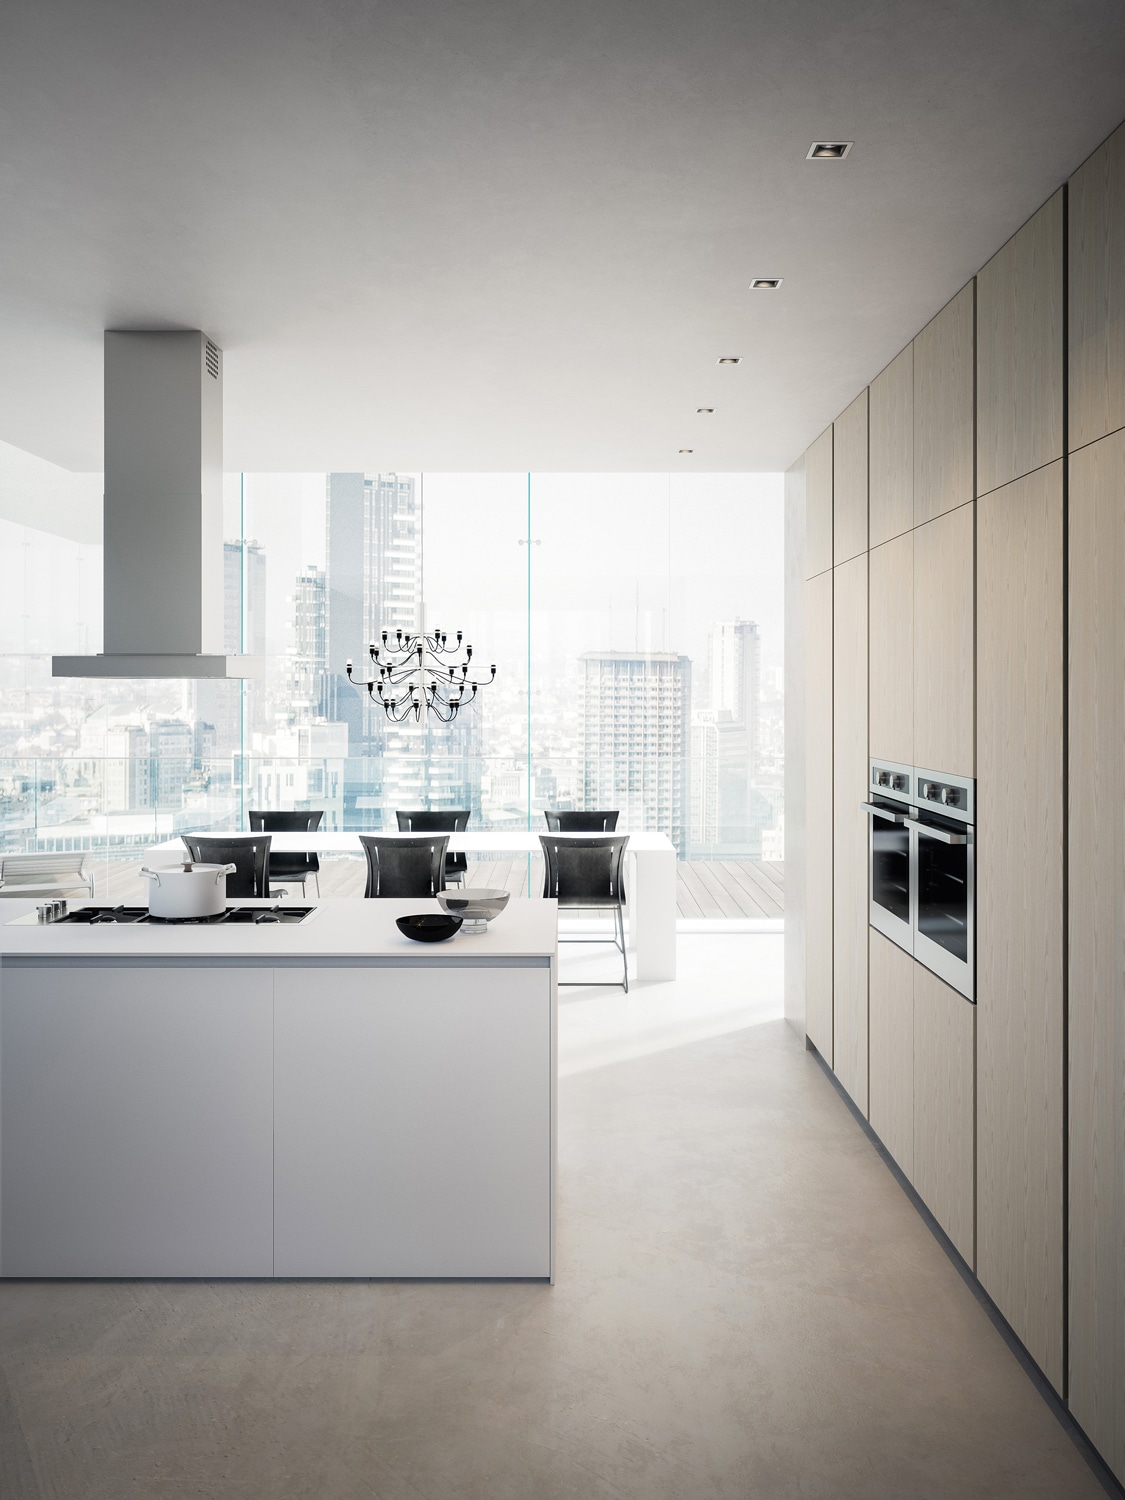 Modern kitchens for single-family residences, condos and luxury high-rises  